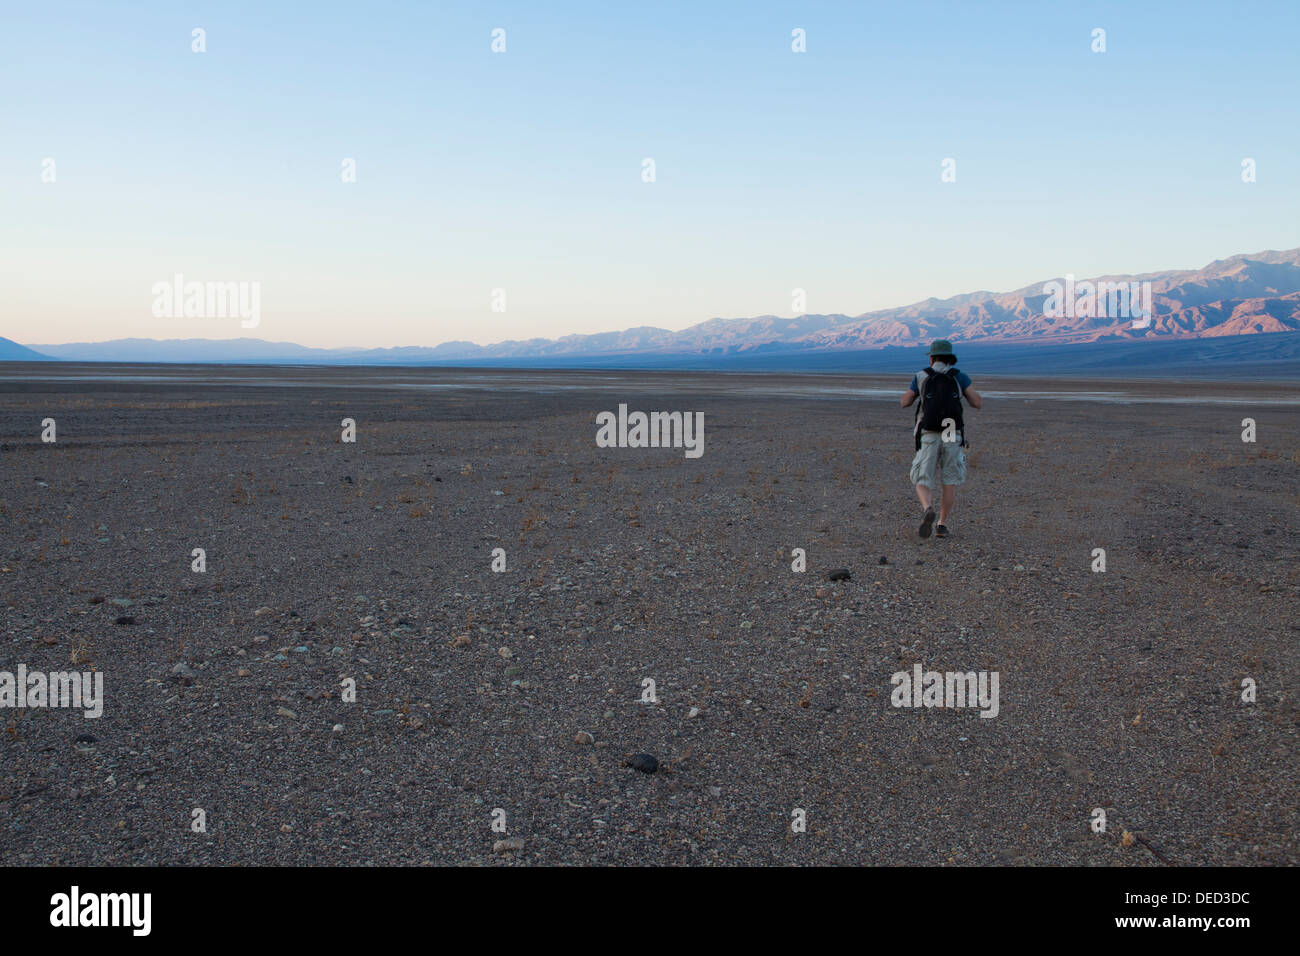 Hiker walking on Death Valley desert dry lake bed Stock Photo